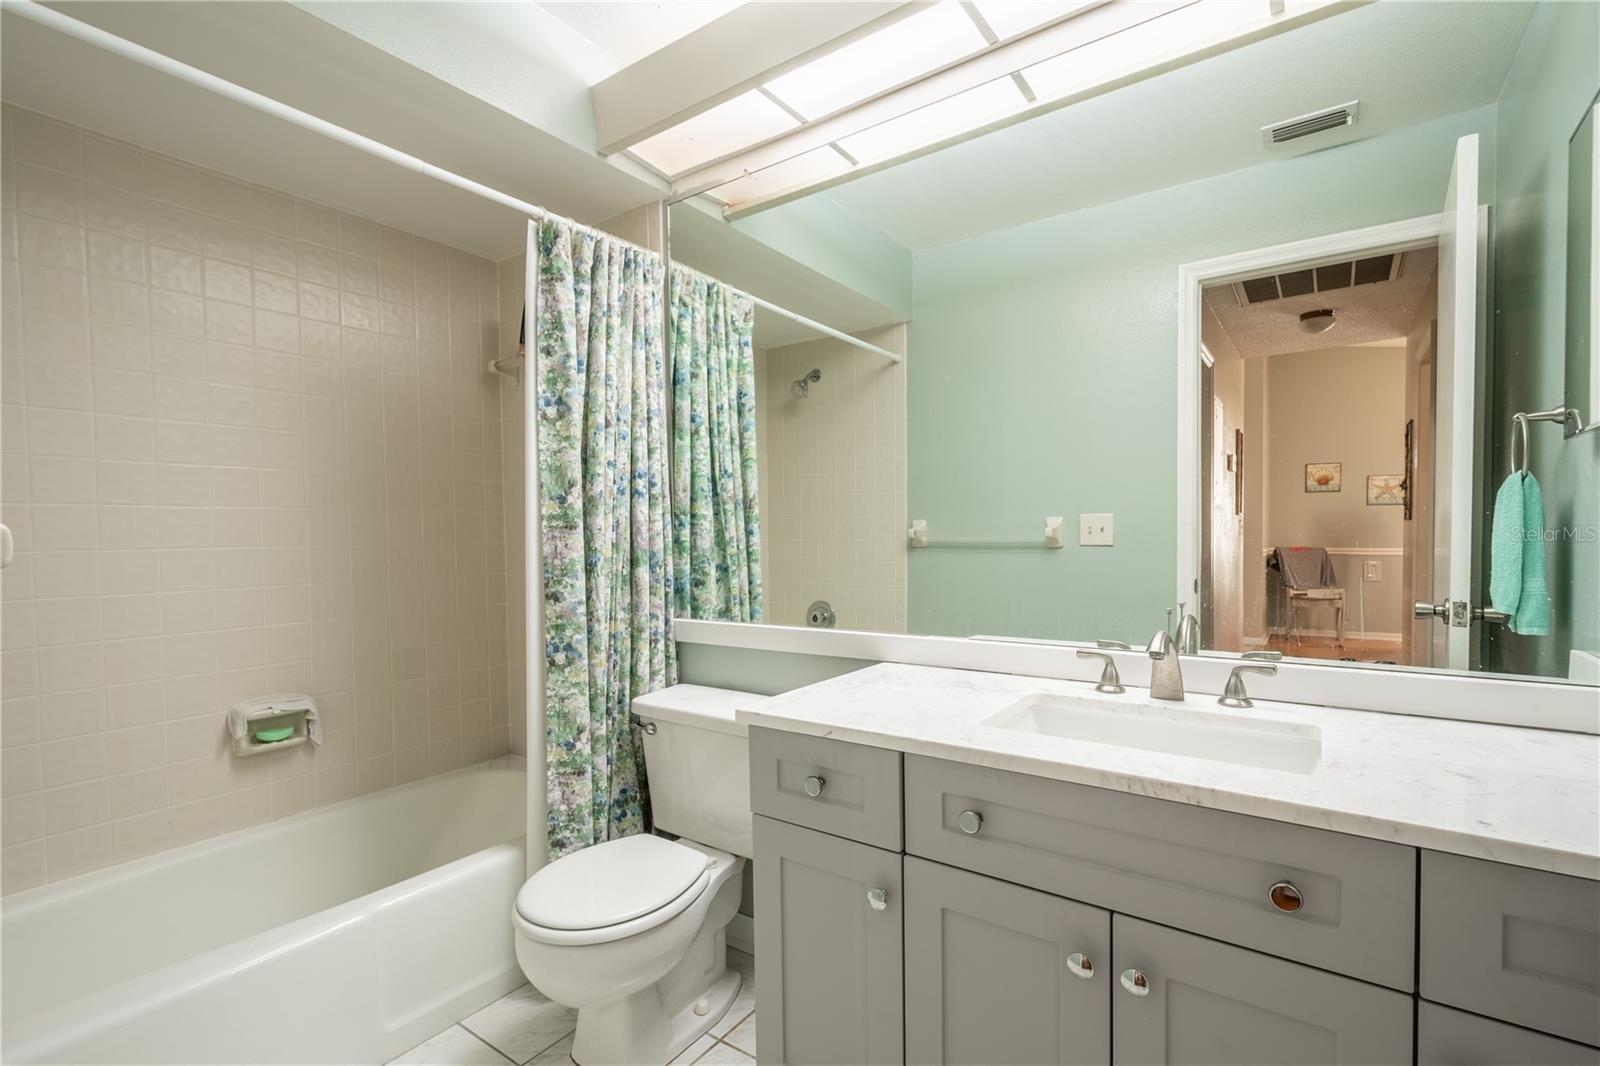 Bath 2 features a tub with shower, mirrored vanity with storage and ceramic tile floor.